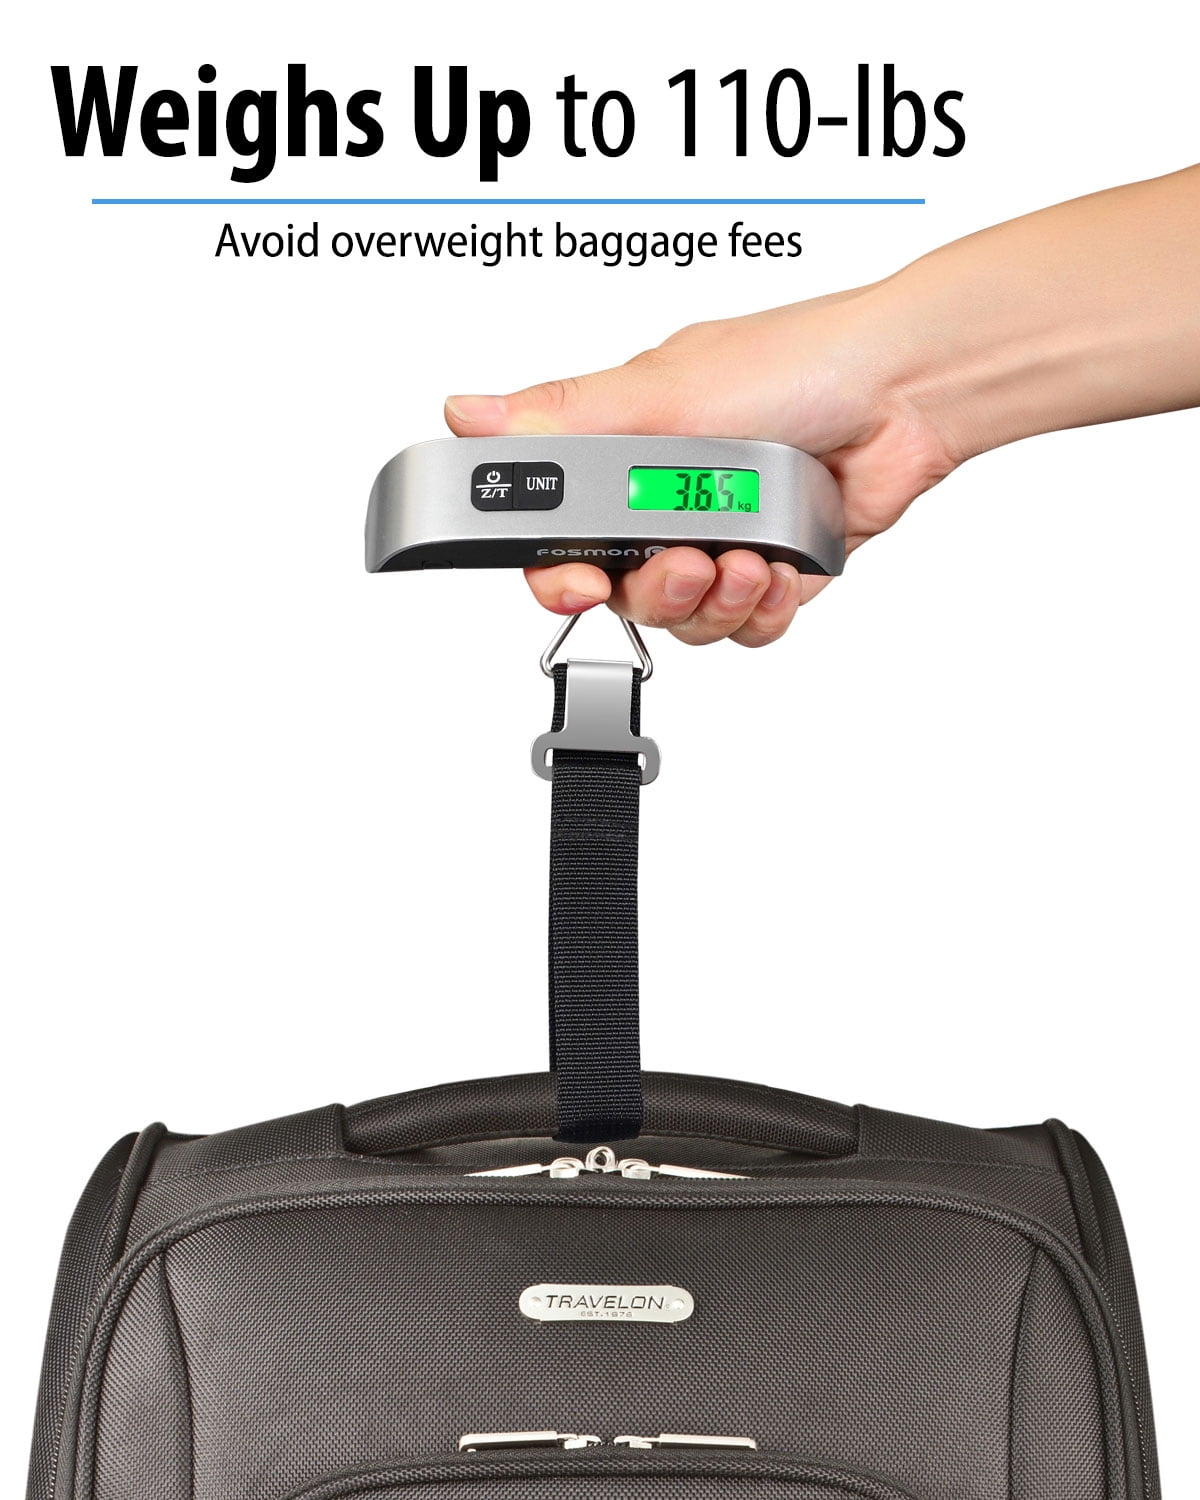 Buy our Compact & Portable luggage weight scale - Now 60% off